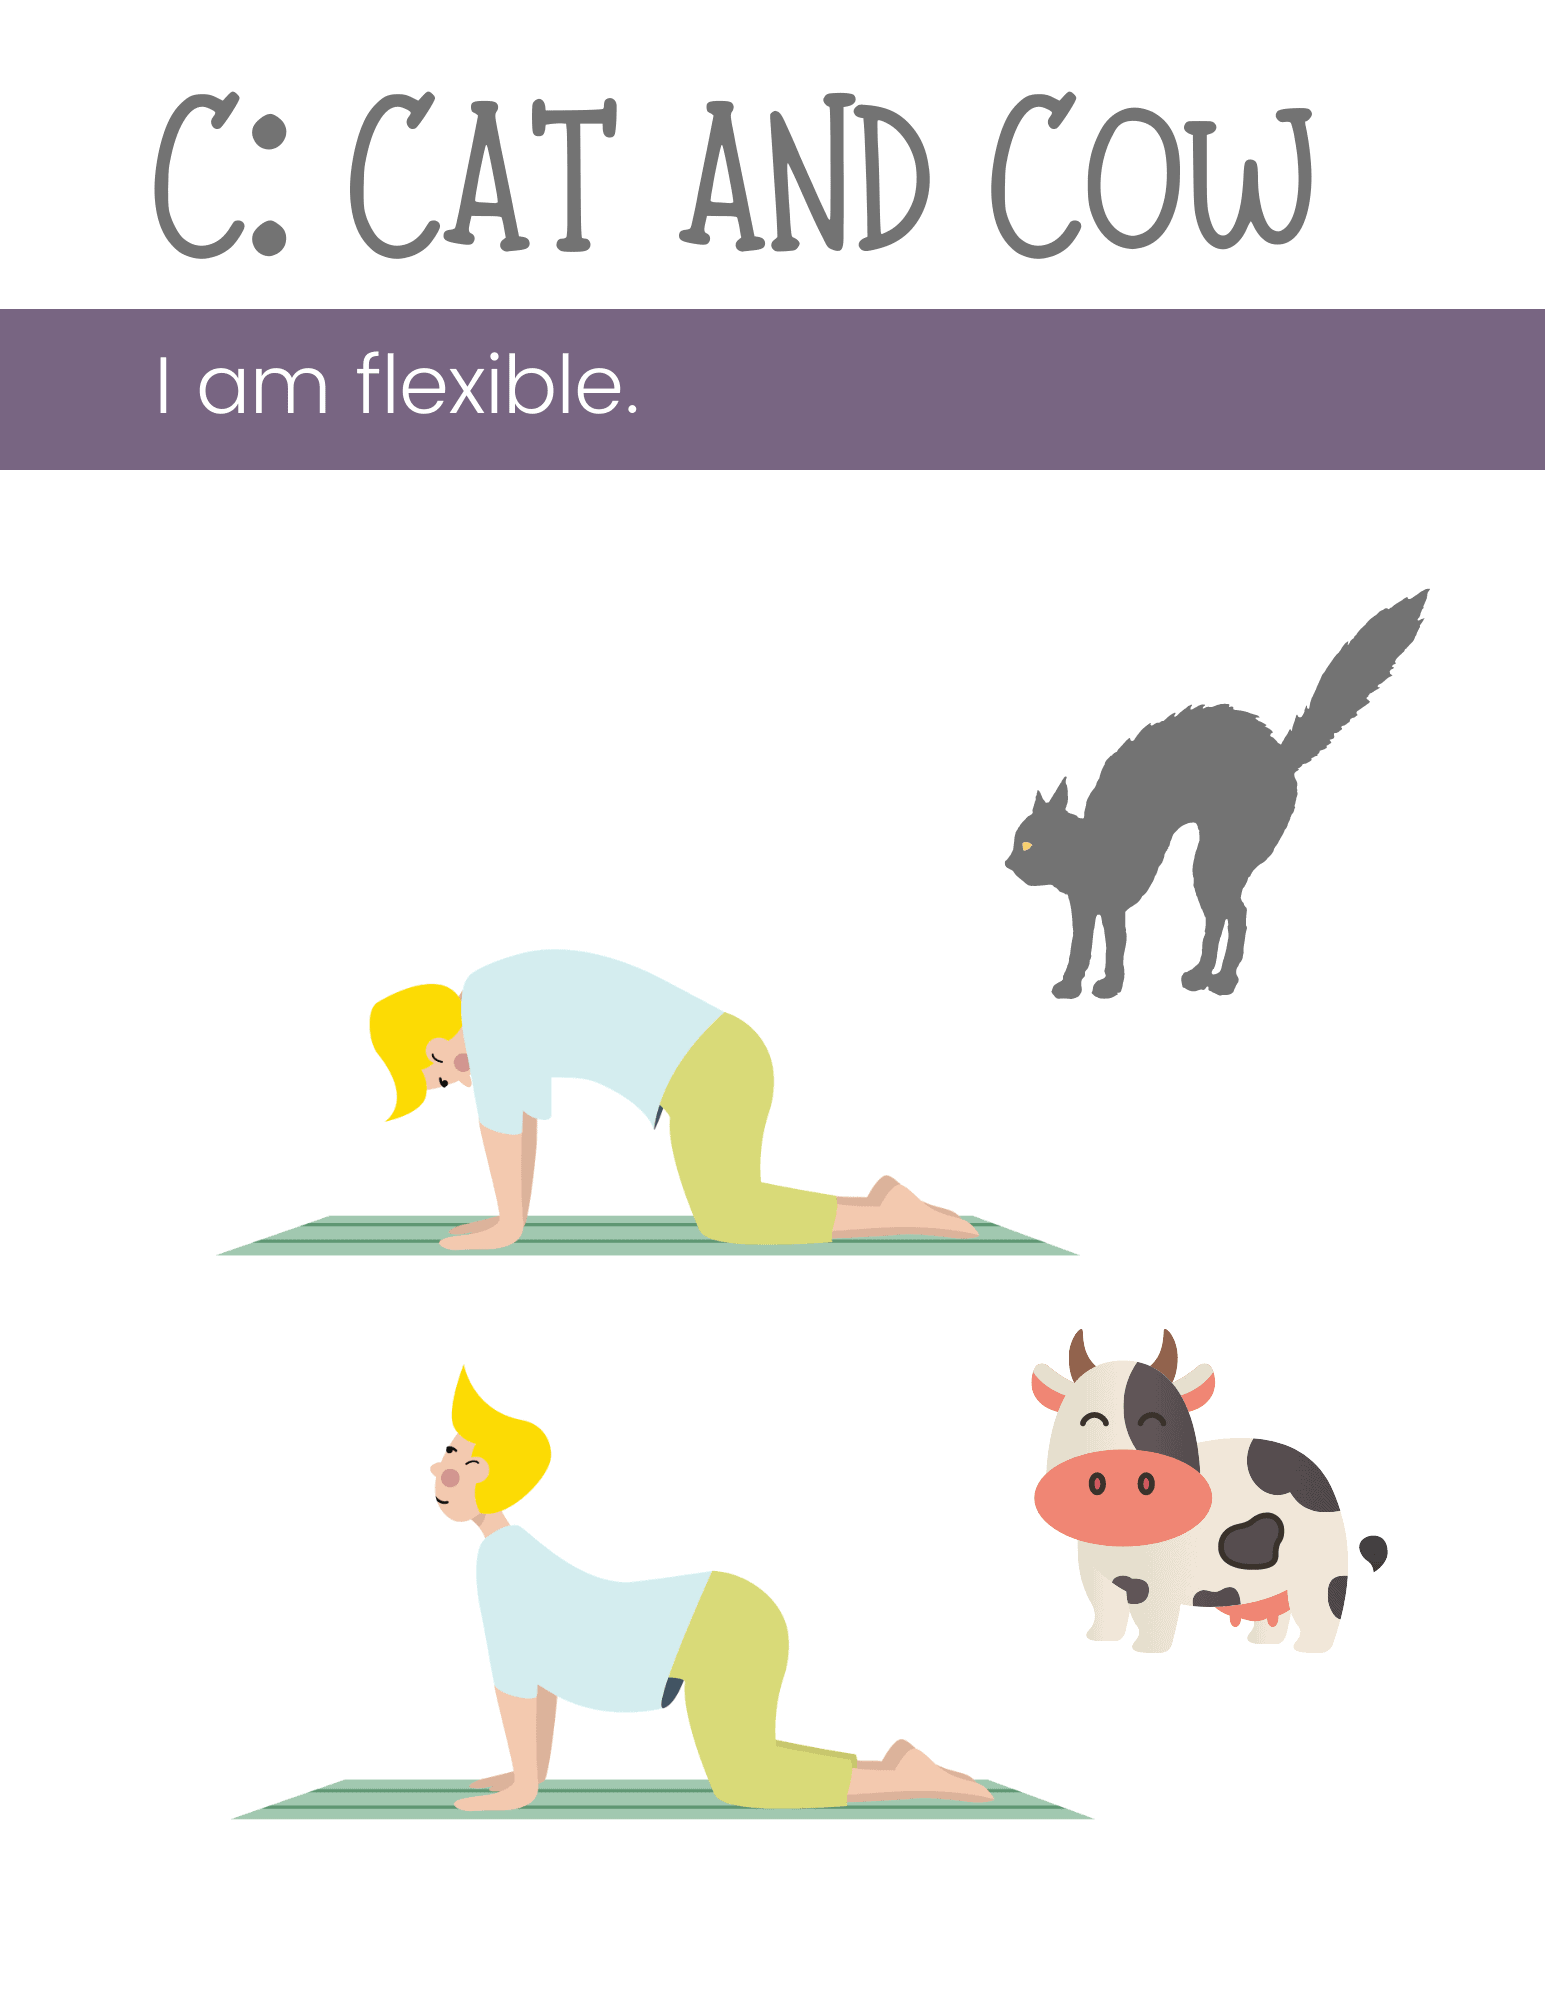 6 Dog Yoga Poses to Try With Your Pup | LoveToKnow Health & Wellness